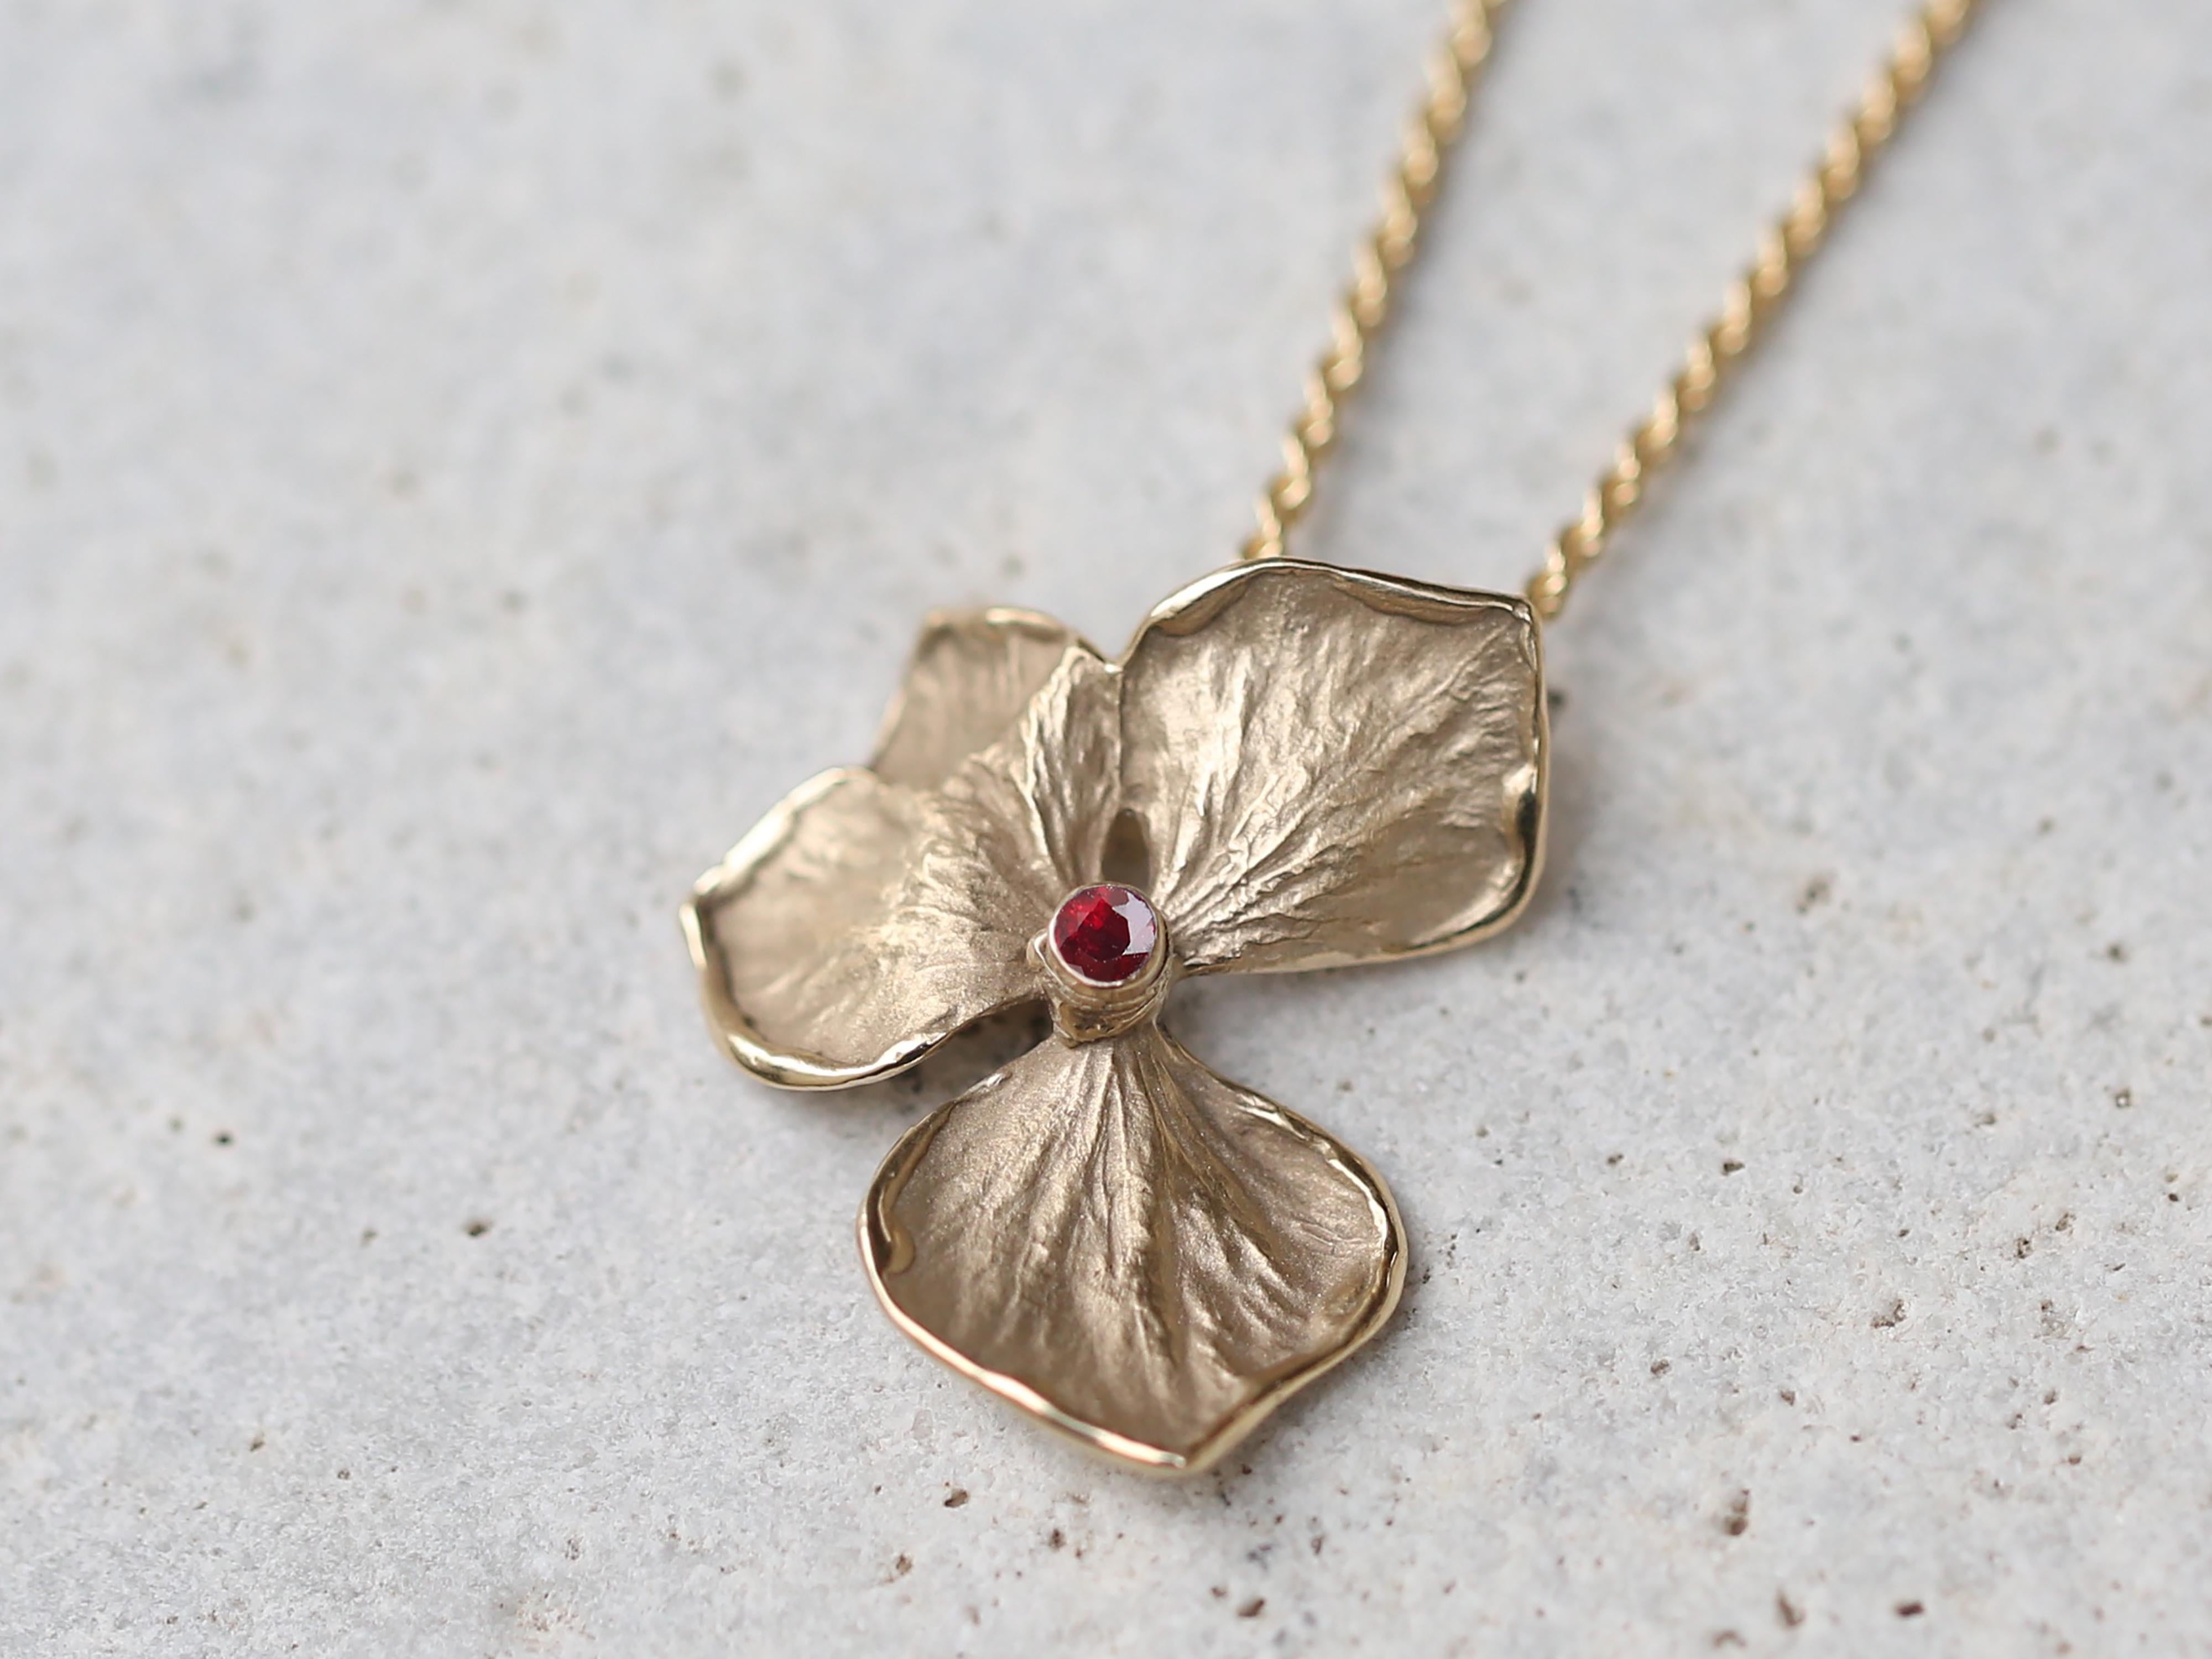 Large Solid Yellow Gold Hydrangea Flower Necklace

This unique pendant is made having a hydrangea flower as a source of inspiration. Each pendant is crafted in wax and then cast in gold.

Materials: Flower Pendant: Solid 14k Gold
Size approx: